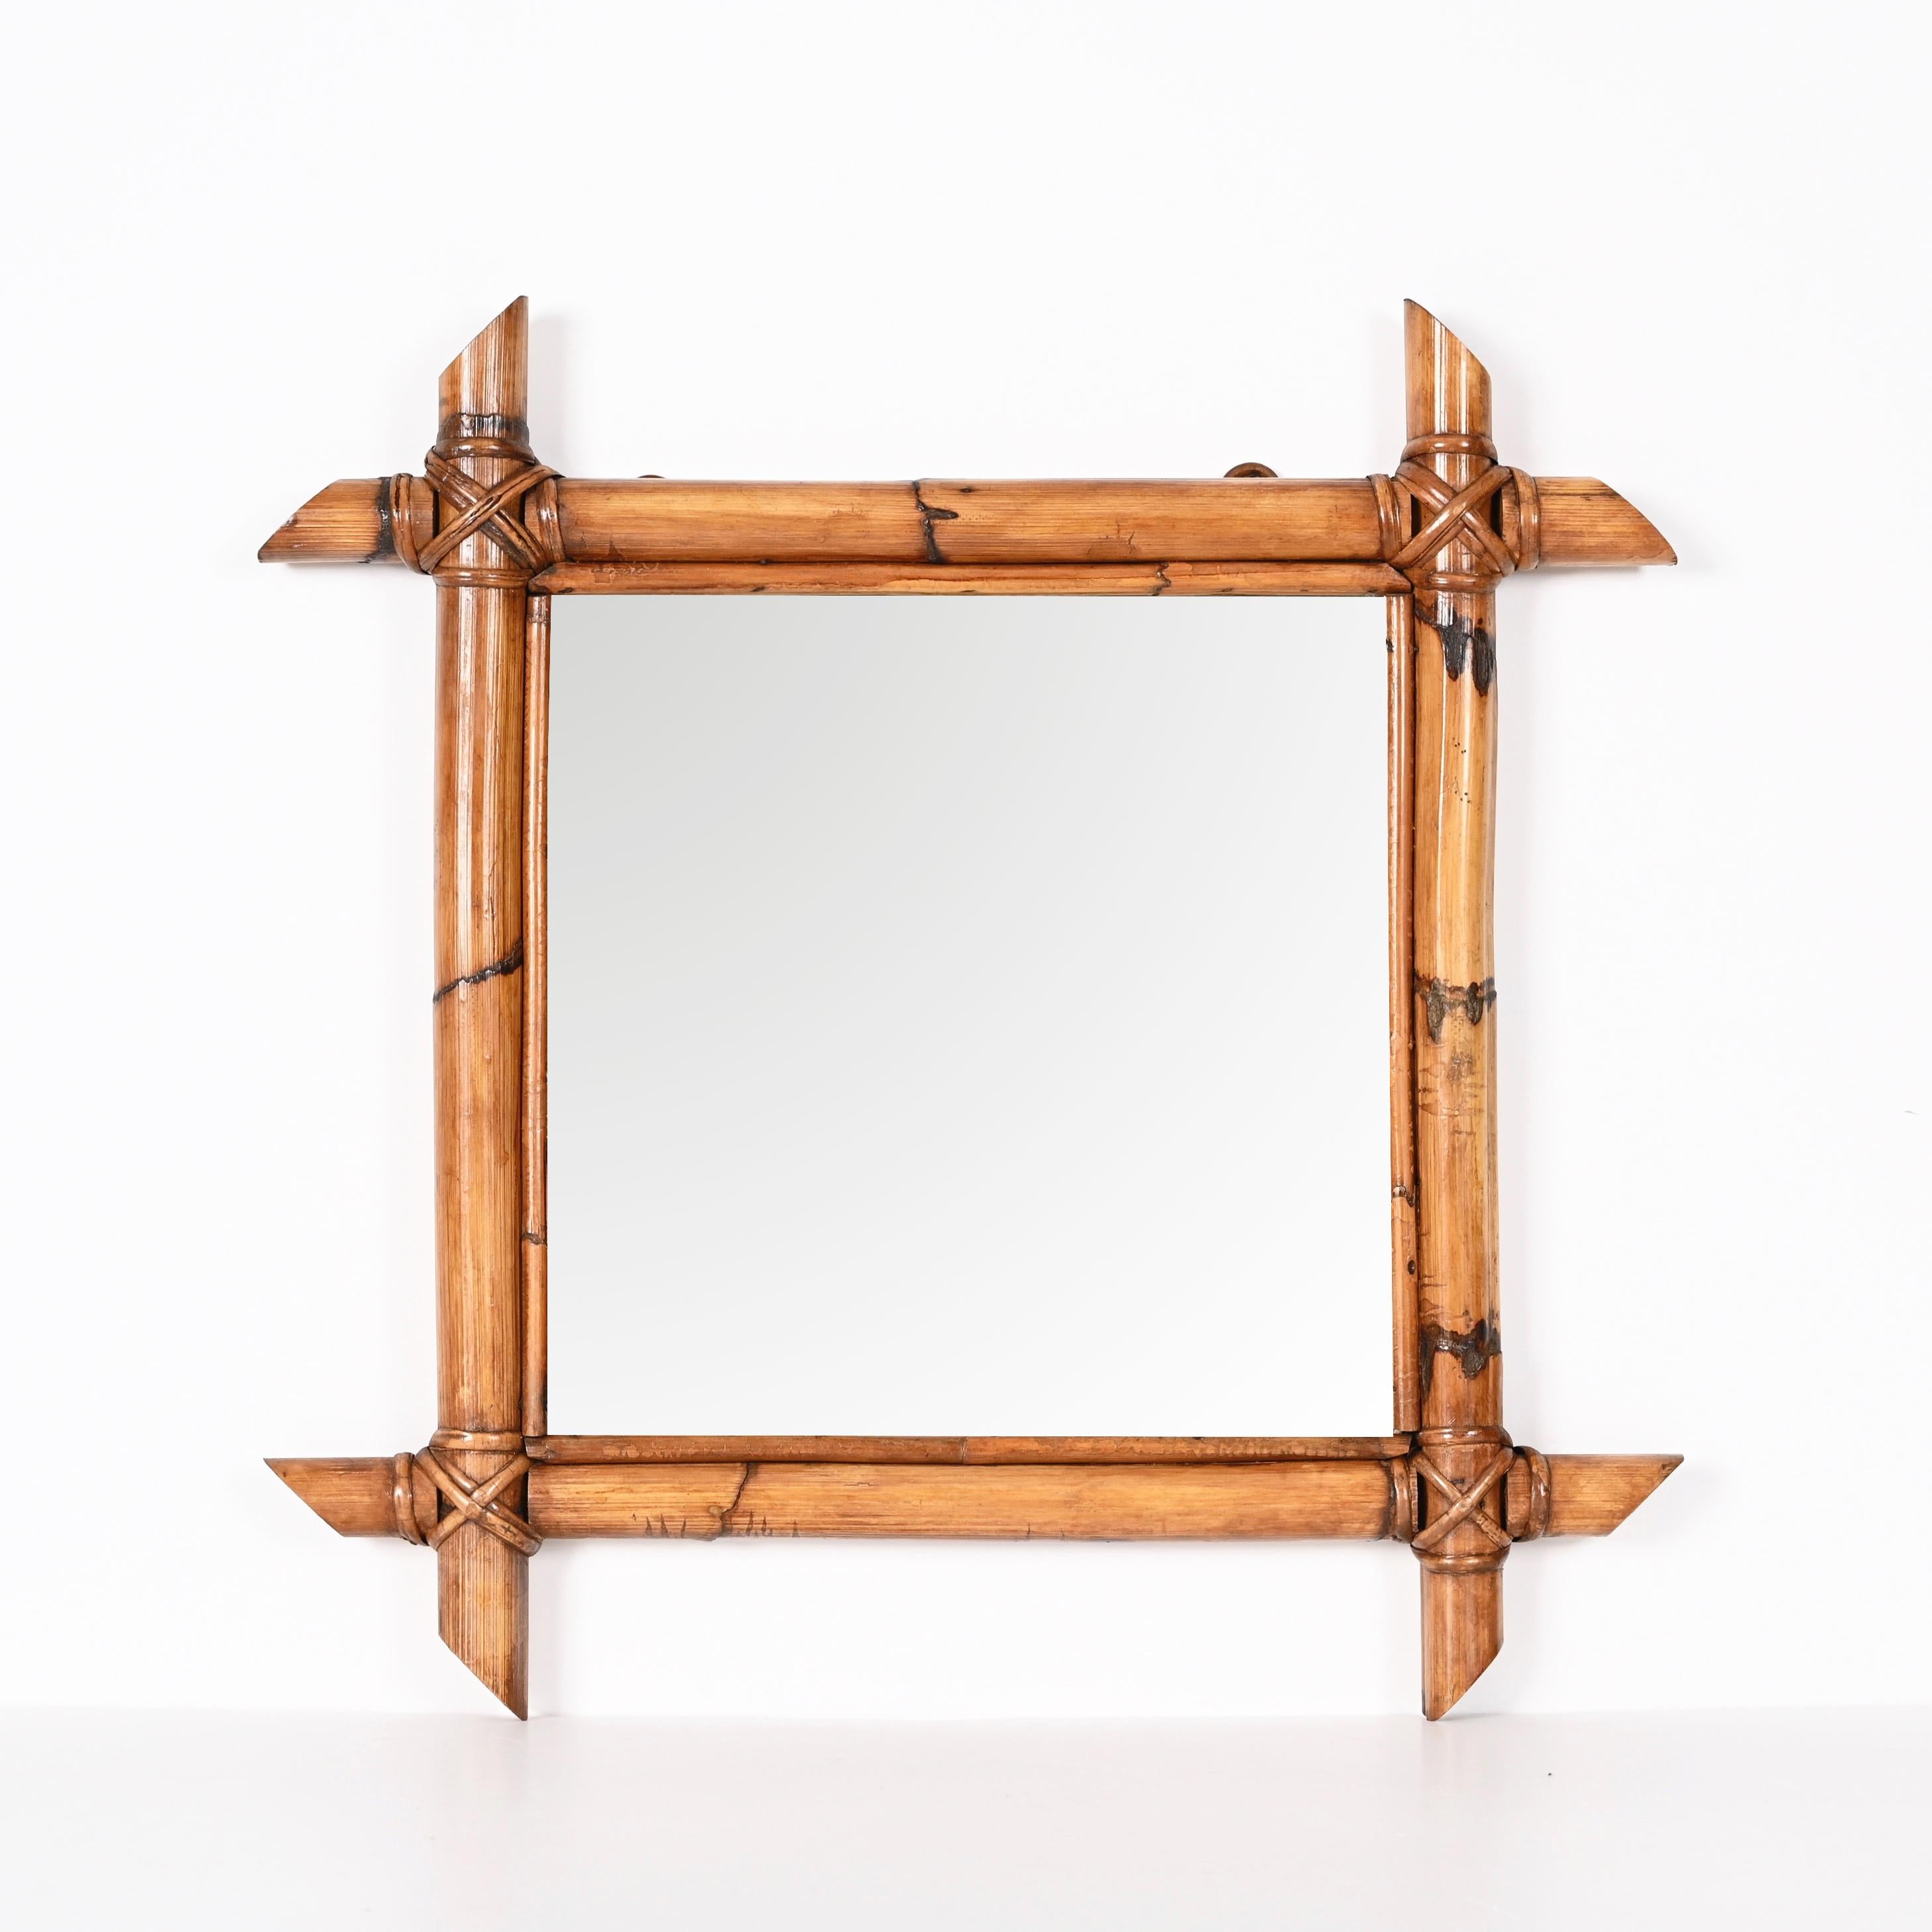 Amazing mid-century square mirror with bamboo woven wicker frame. This fantastic item was produced in Italy during the 1950s.

The way in which bamboo lines and glass integrate is fantastic and gives to this mirror an everlasting charm, the French